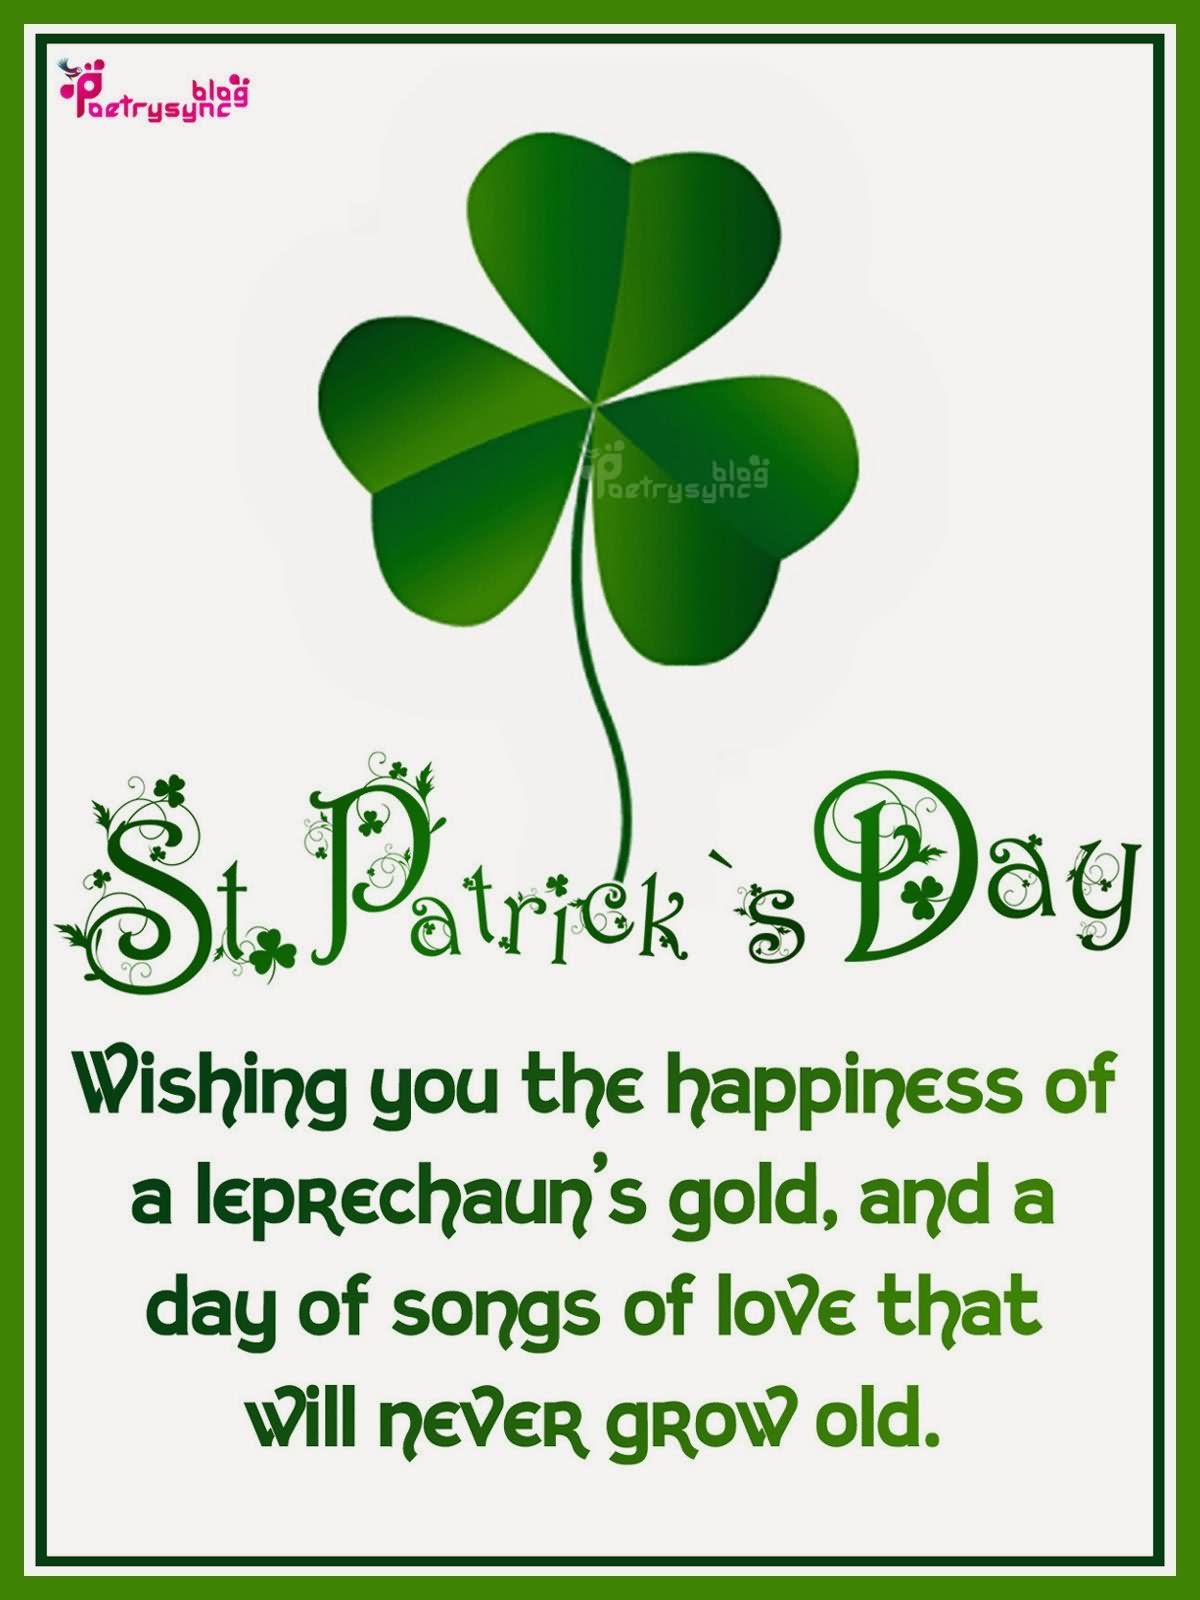 Happy St. Patrick’s Day. Wishing you the happiness of a leprechaun’s gold and a day of songs of love that will never grow old.